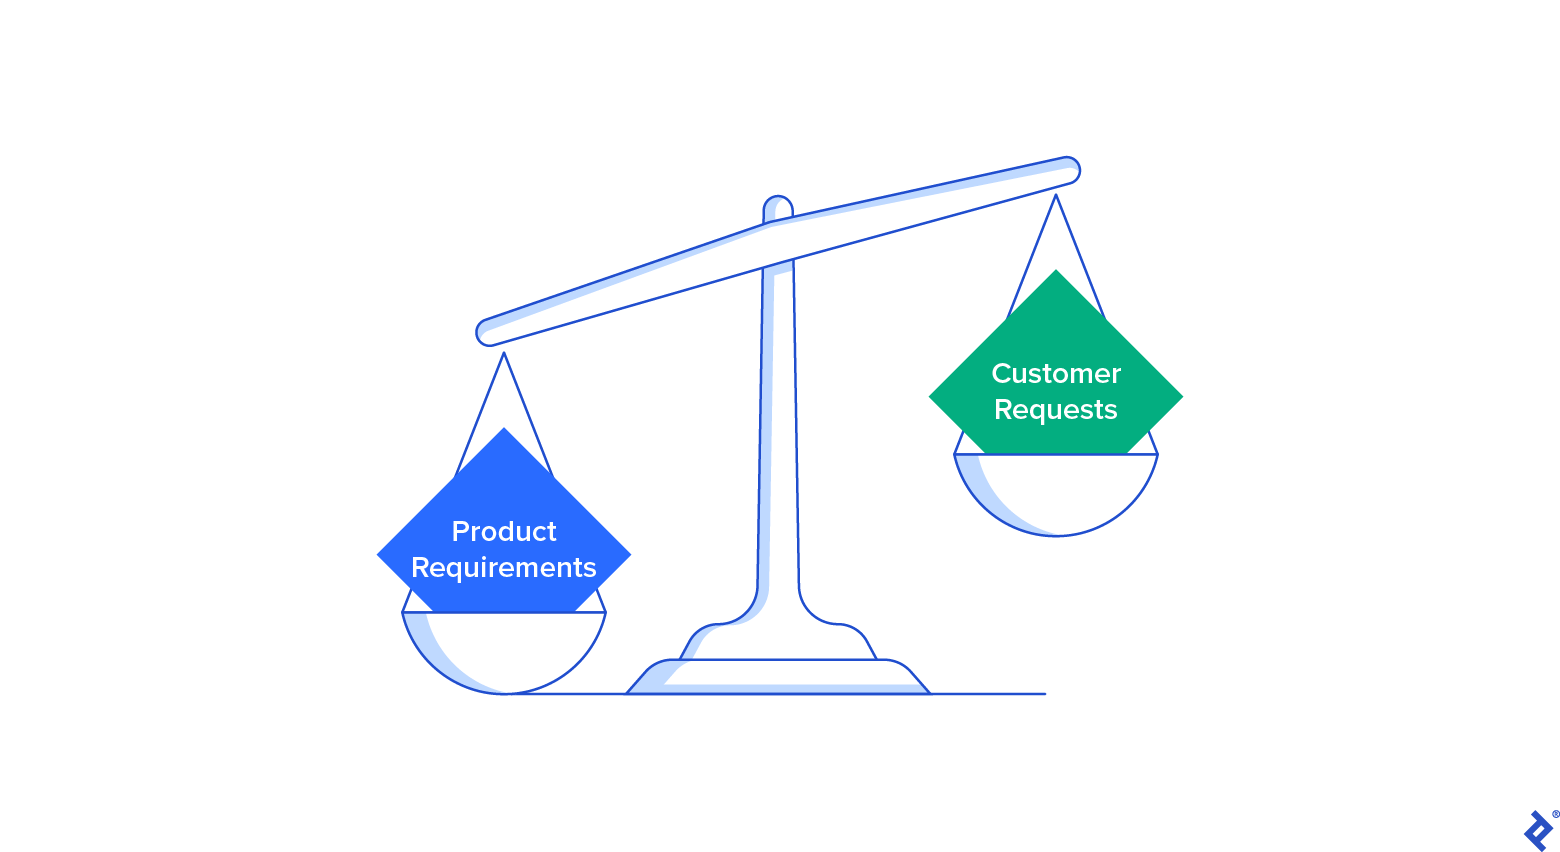 An illustrated scale shows product requirements outweighing customer requests.